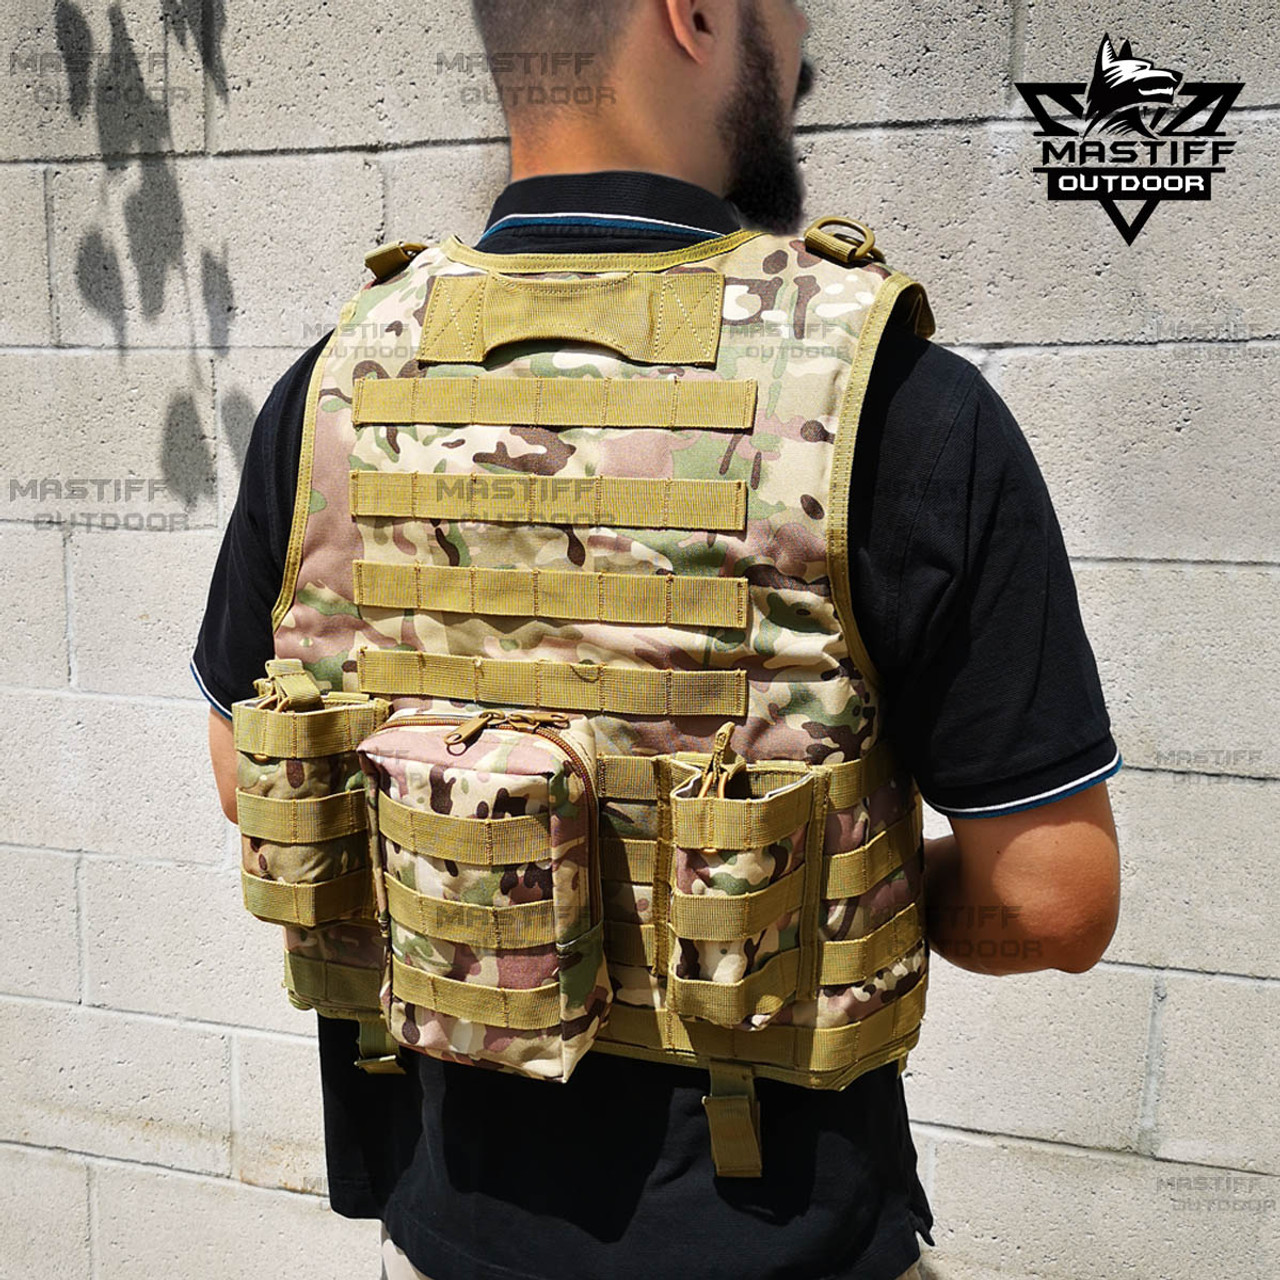 Yakeda Tactical Vest Armor Plate Carrier Airsoft Paintball Jacket